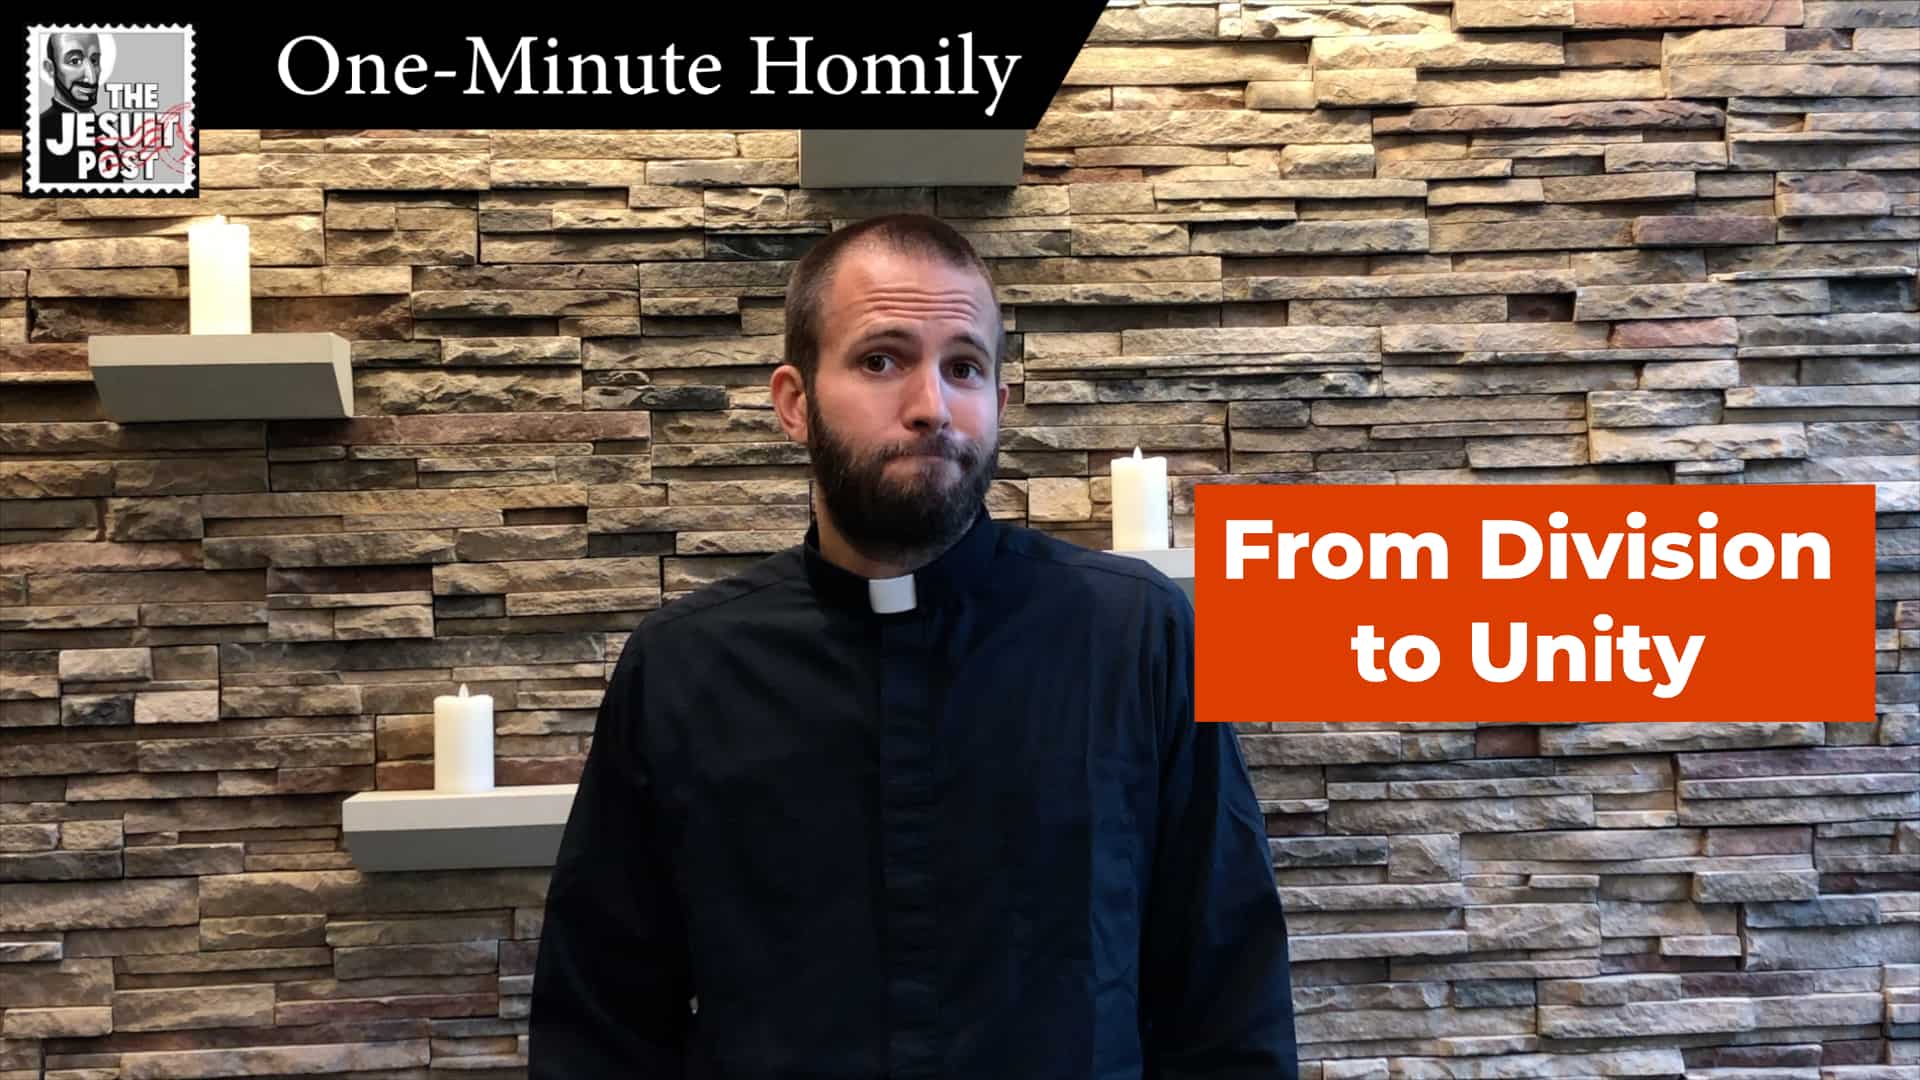 One-Minute Homily: “From Division to Unity”